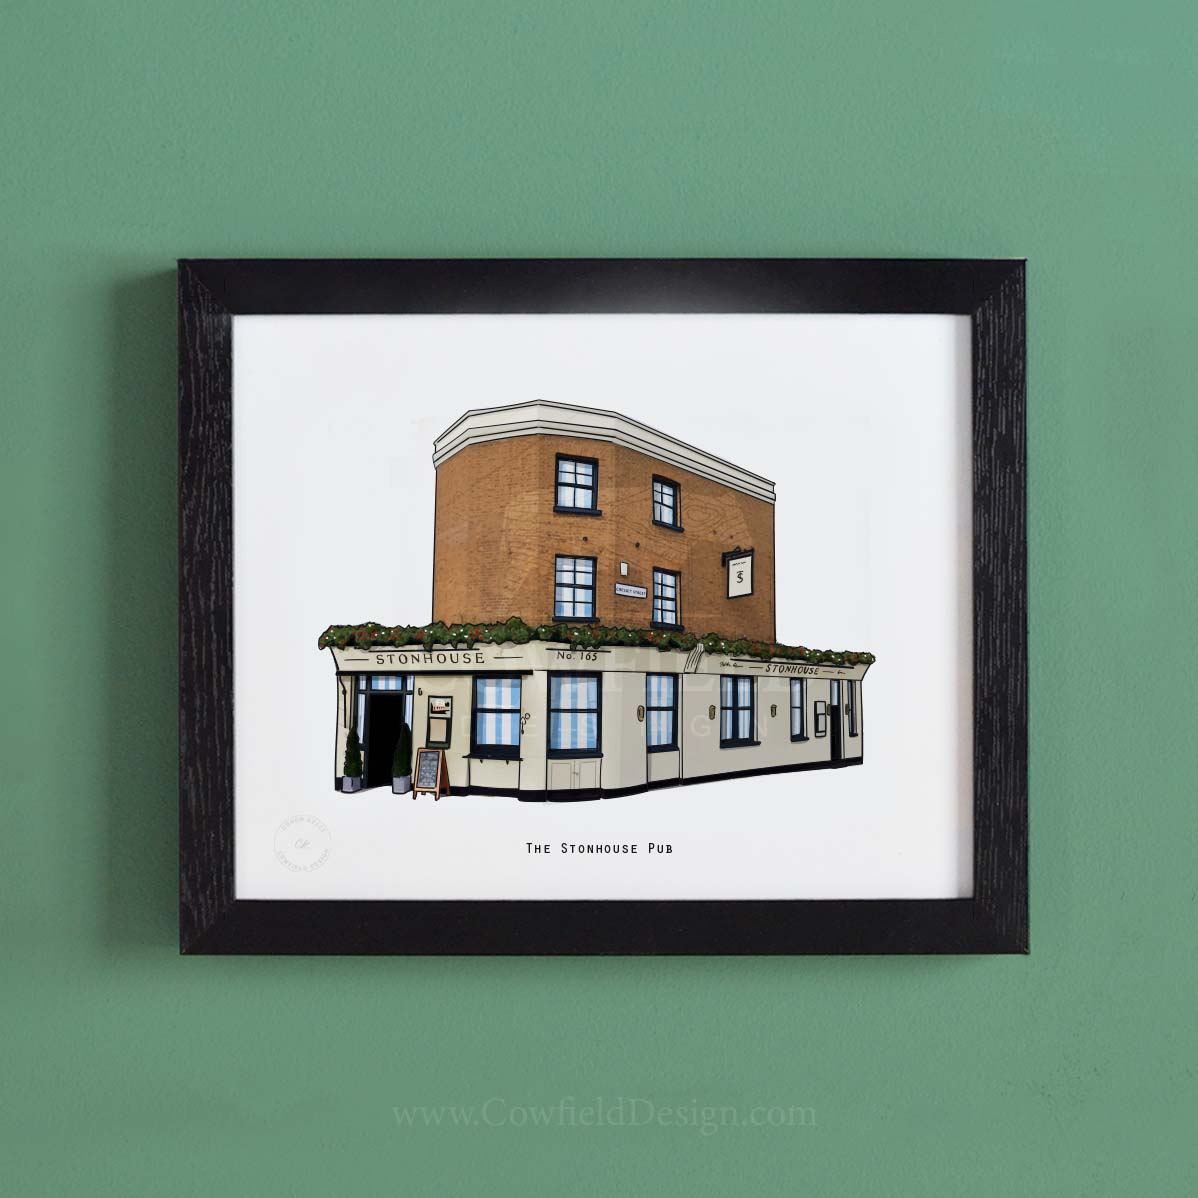 The Stonhouse Pub - London Requested Pubs 6th